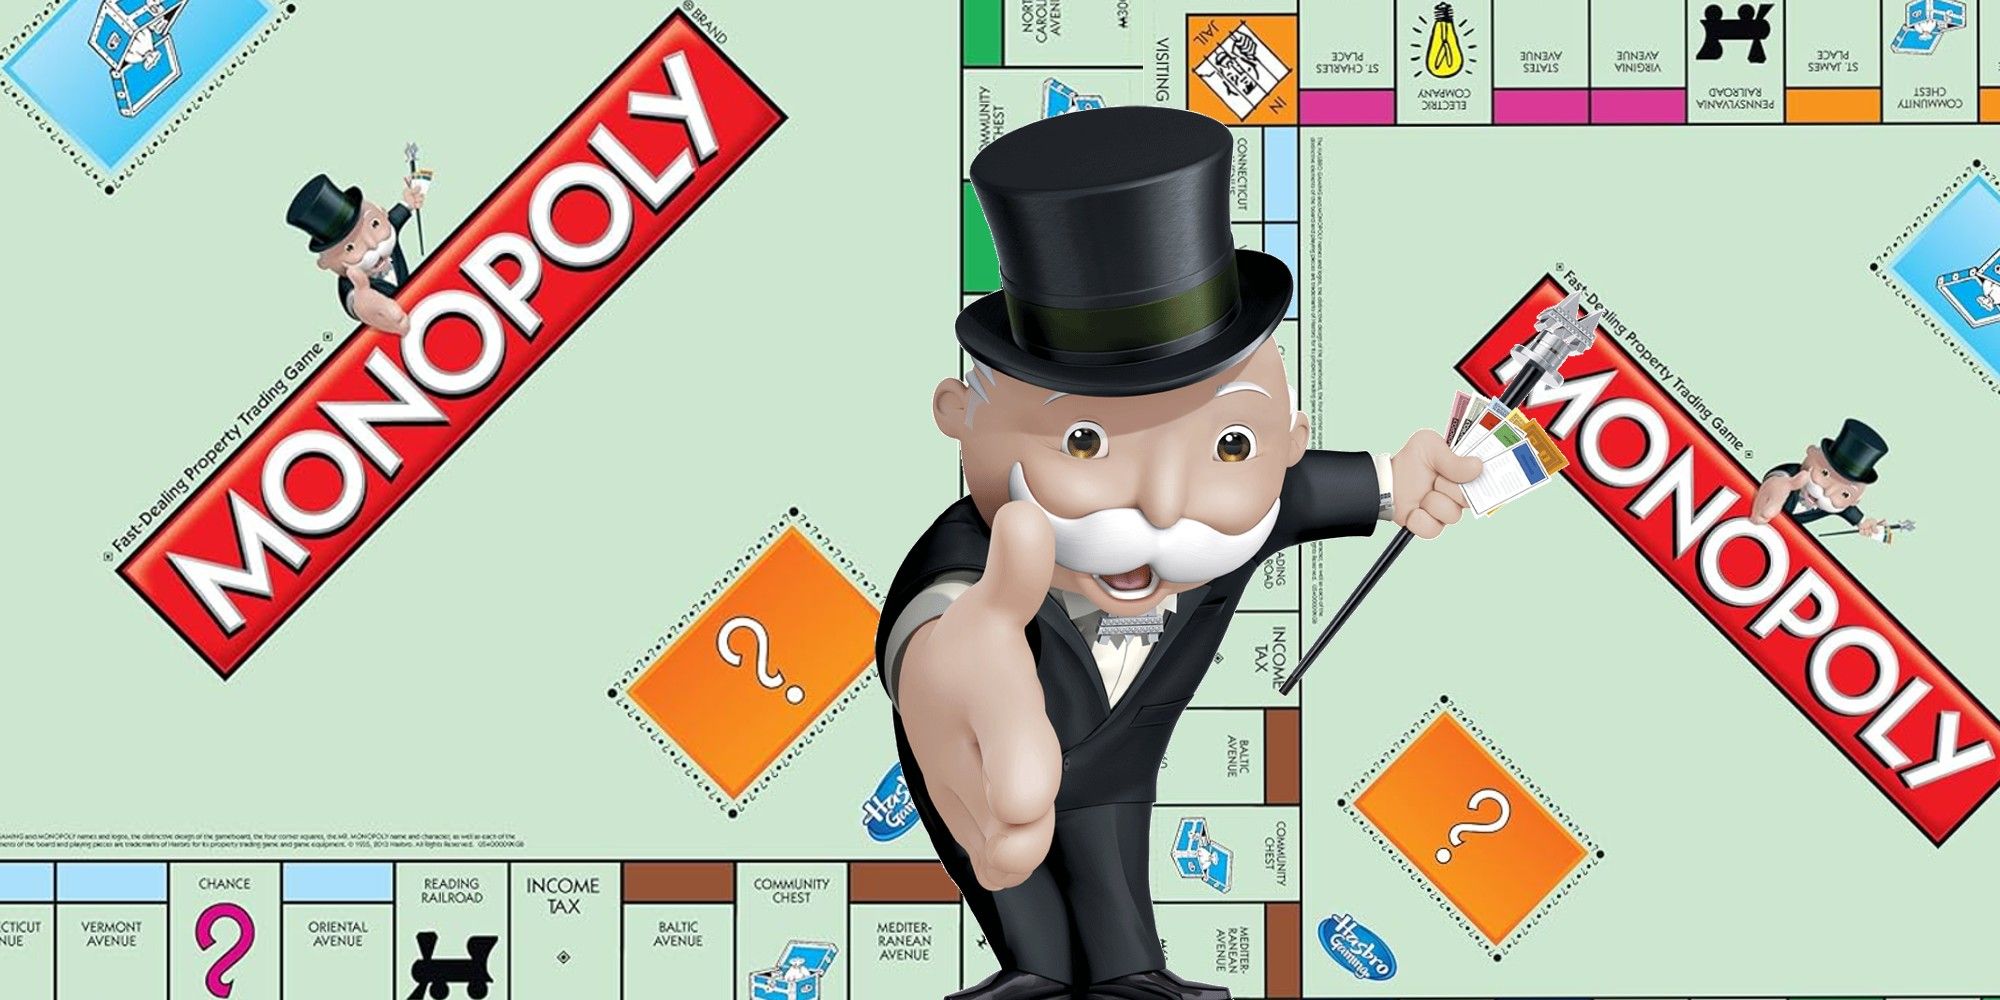 10 classic TV and movie versions of Monopoly